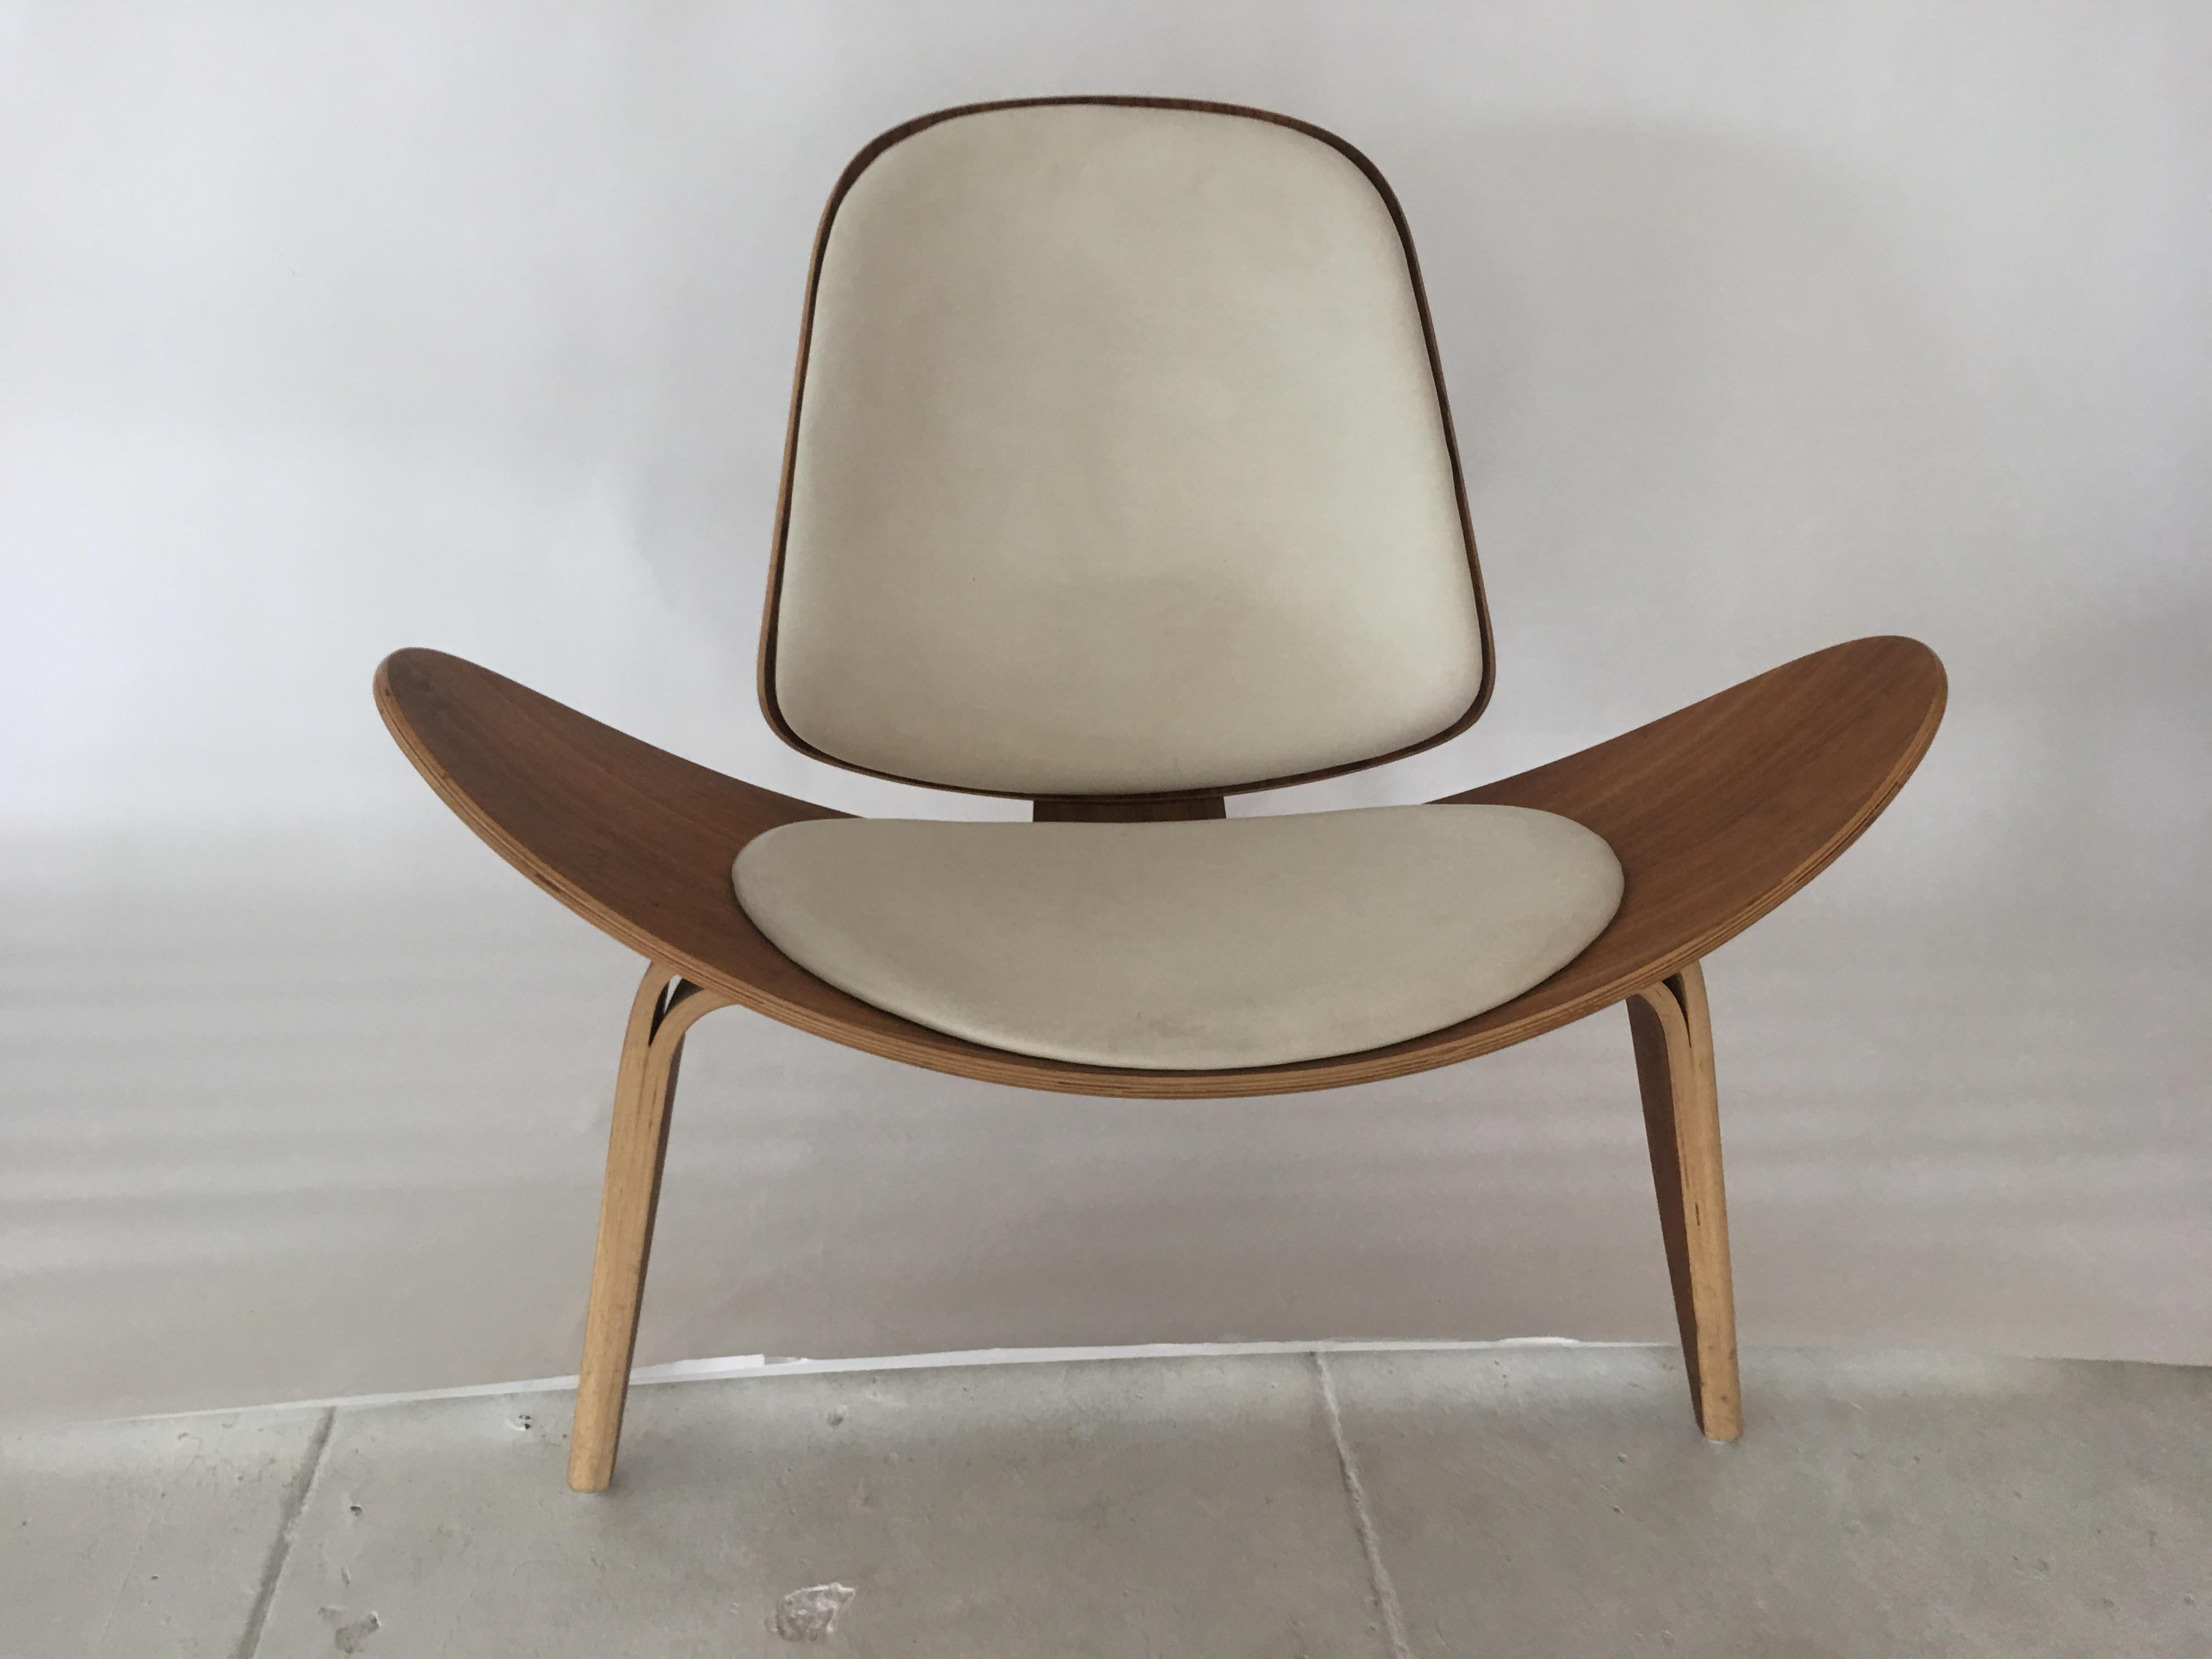 Very rare Shell chair by Hans Wegner, Denmark, 1963.
When several of Wegner's Shell chairs appear together around a table, they recall a sculpture by Alexander Calder.